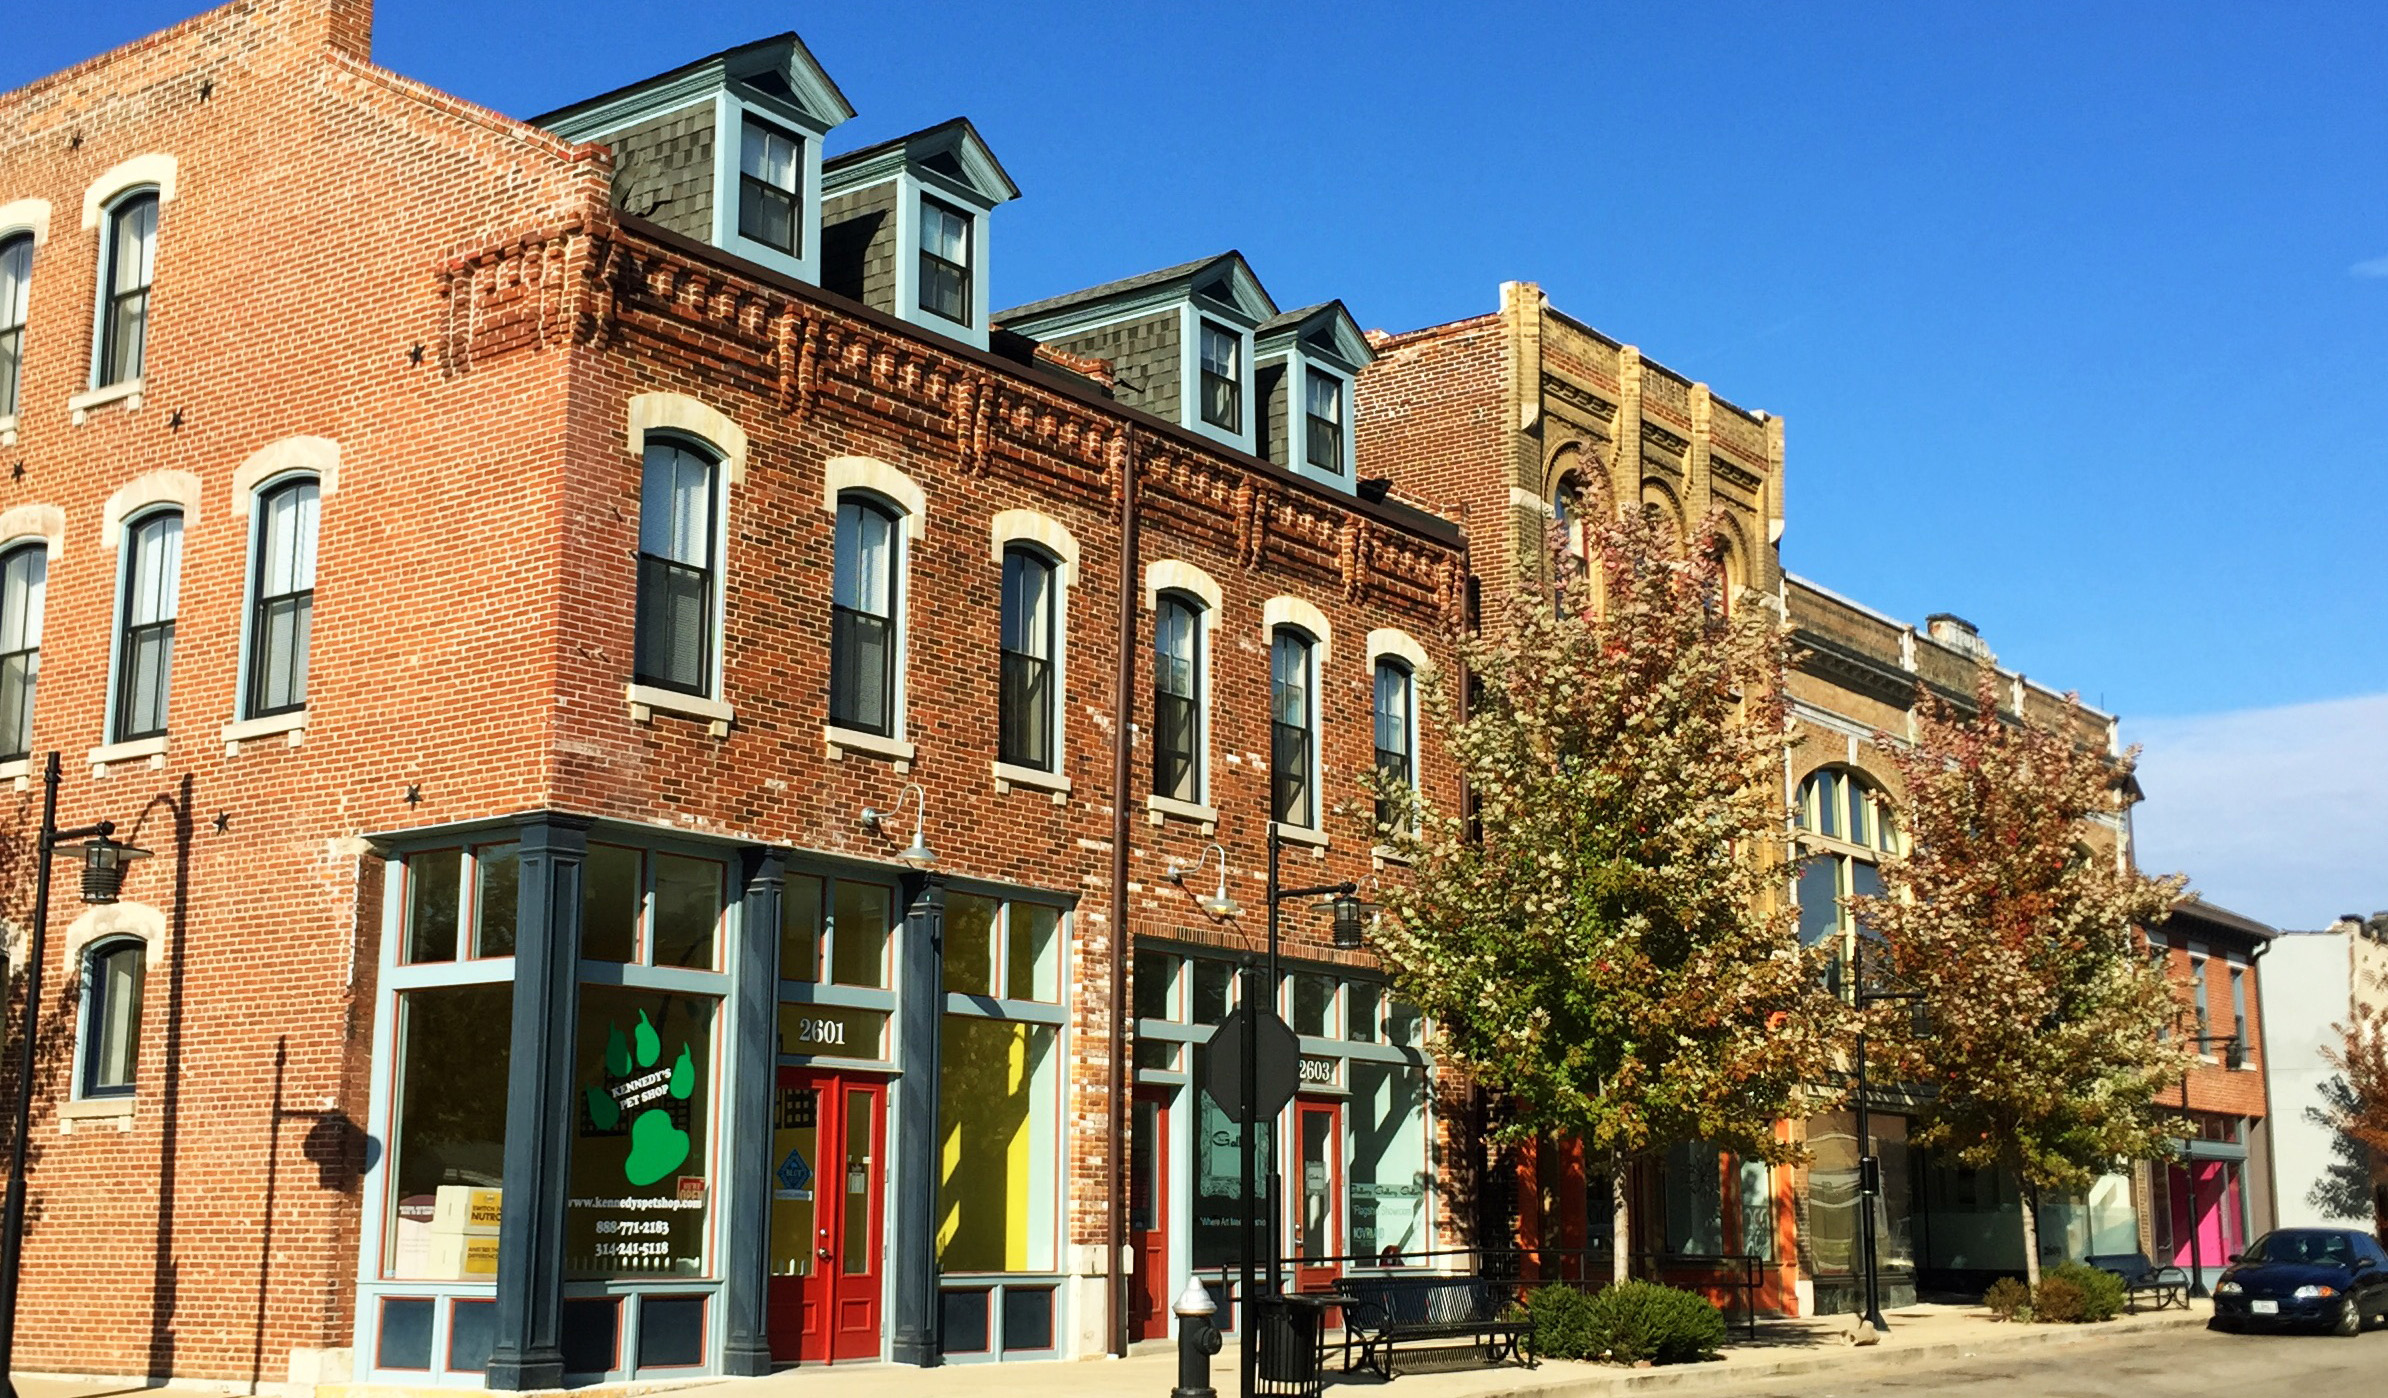 A brick building with multiple colorful storefronts.